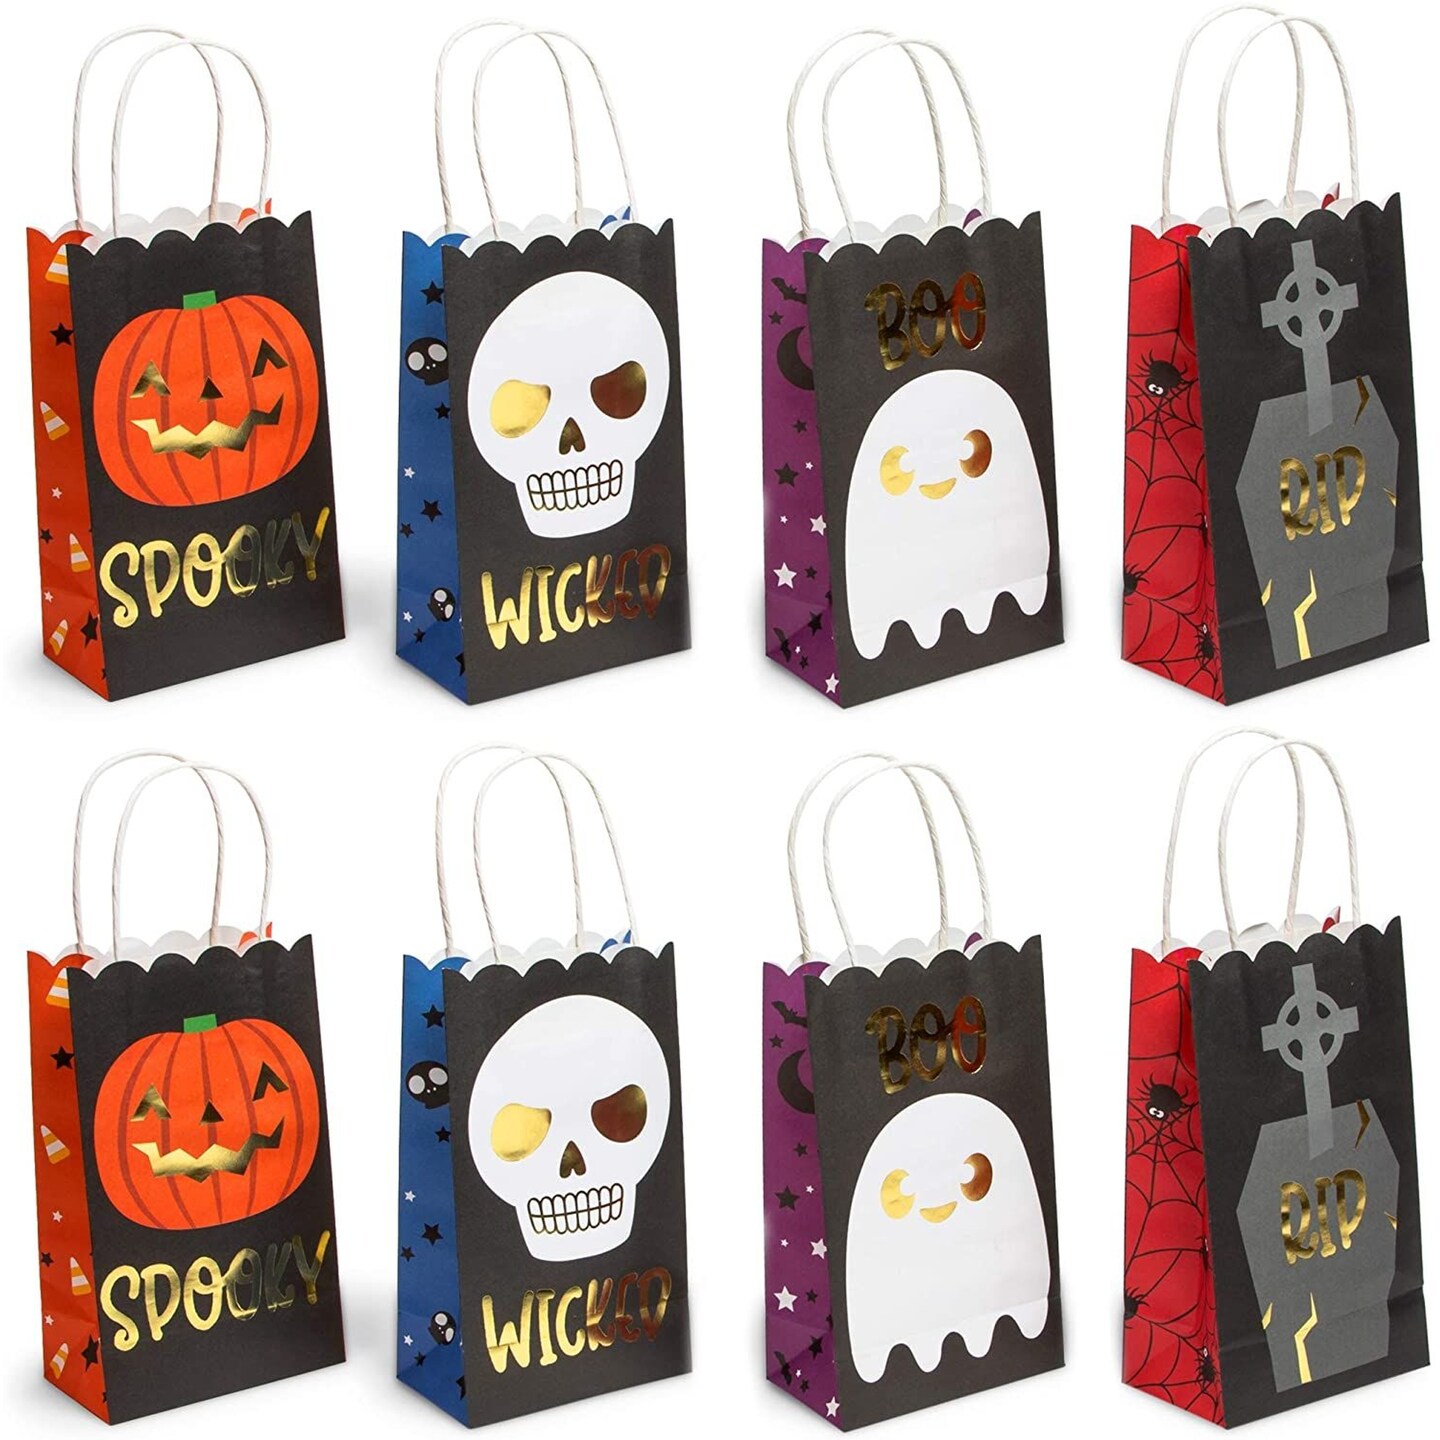 24 Pack Halloween Paper Goodie Bags with Handles for Kids Trick or Treat Candy Gift, Party Favor Supplies, 4 Designs